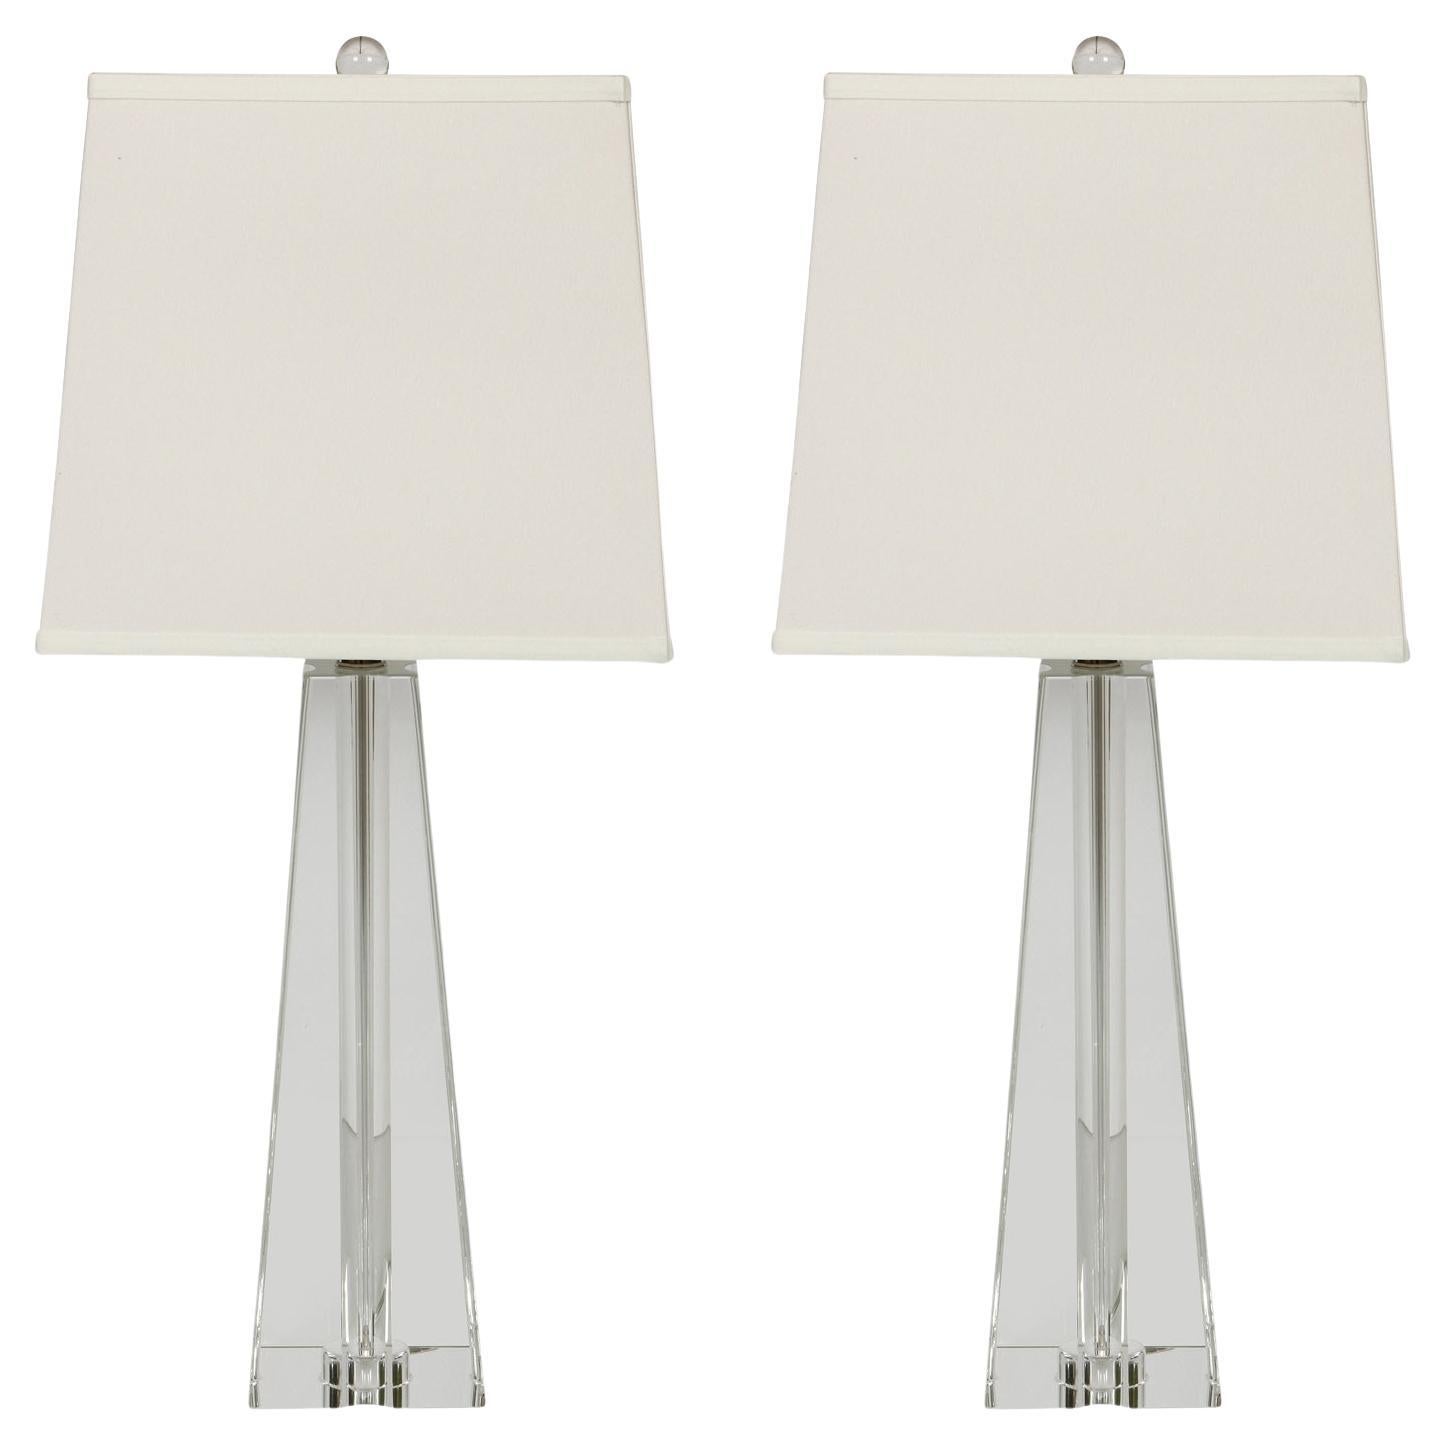 A Pair of Tall Glass Faceted Lamps